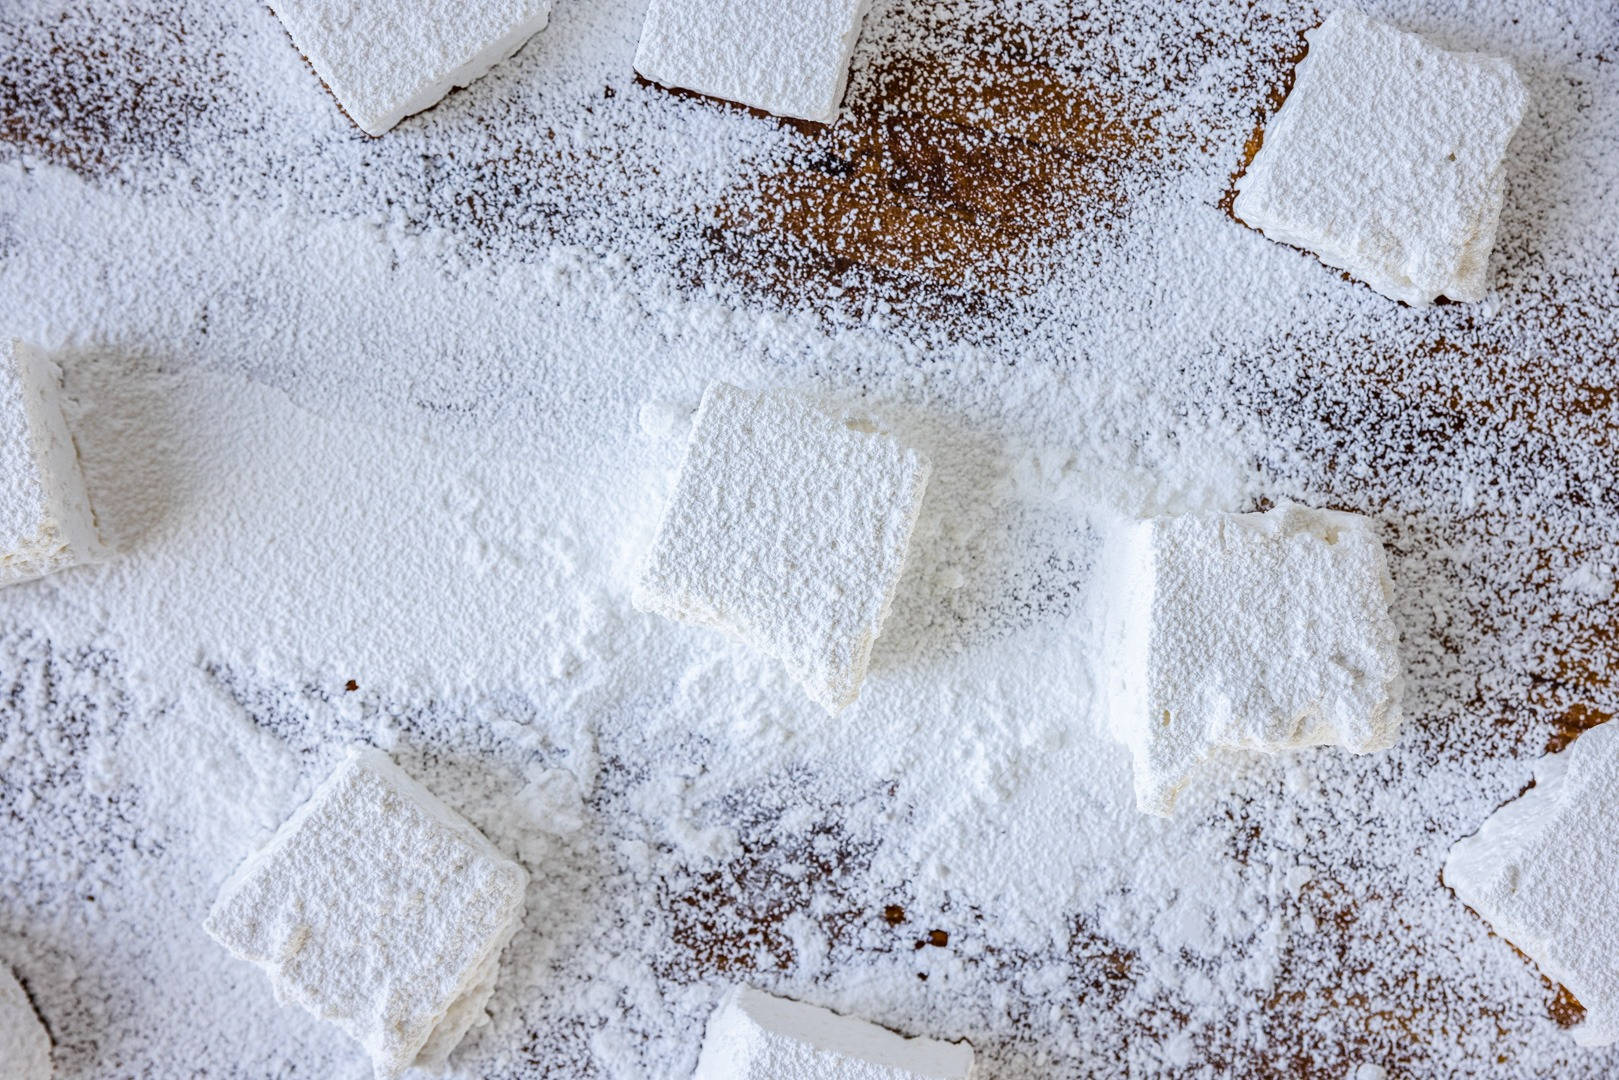 Caption: A Delicious Bite Waiting - Delicate White Marshmallows Background